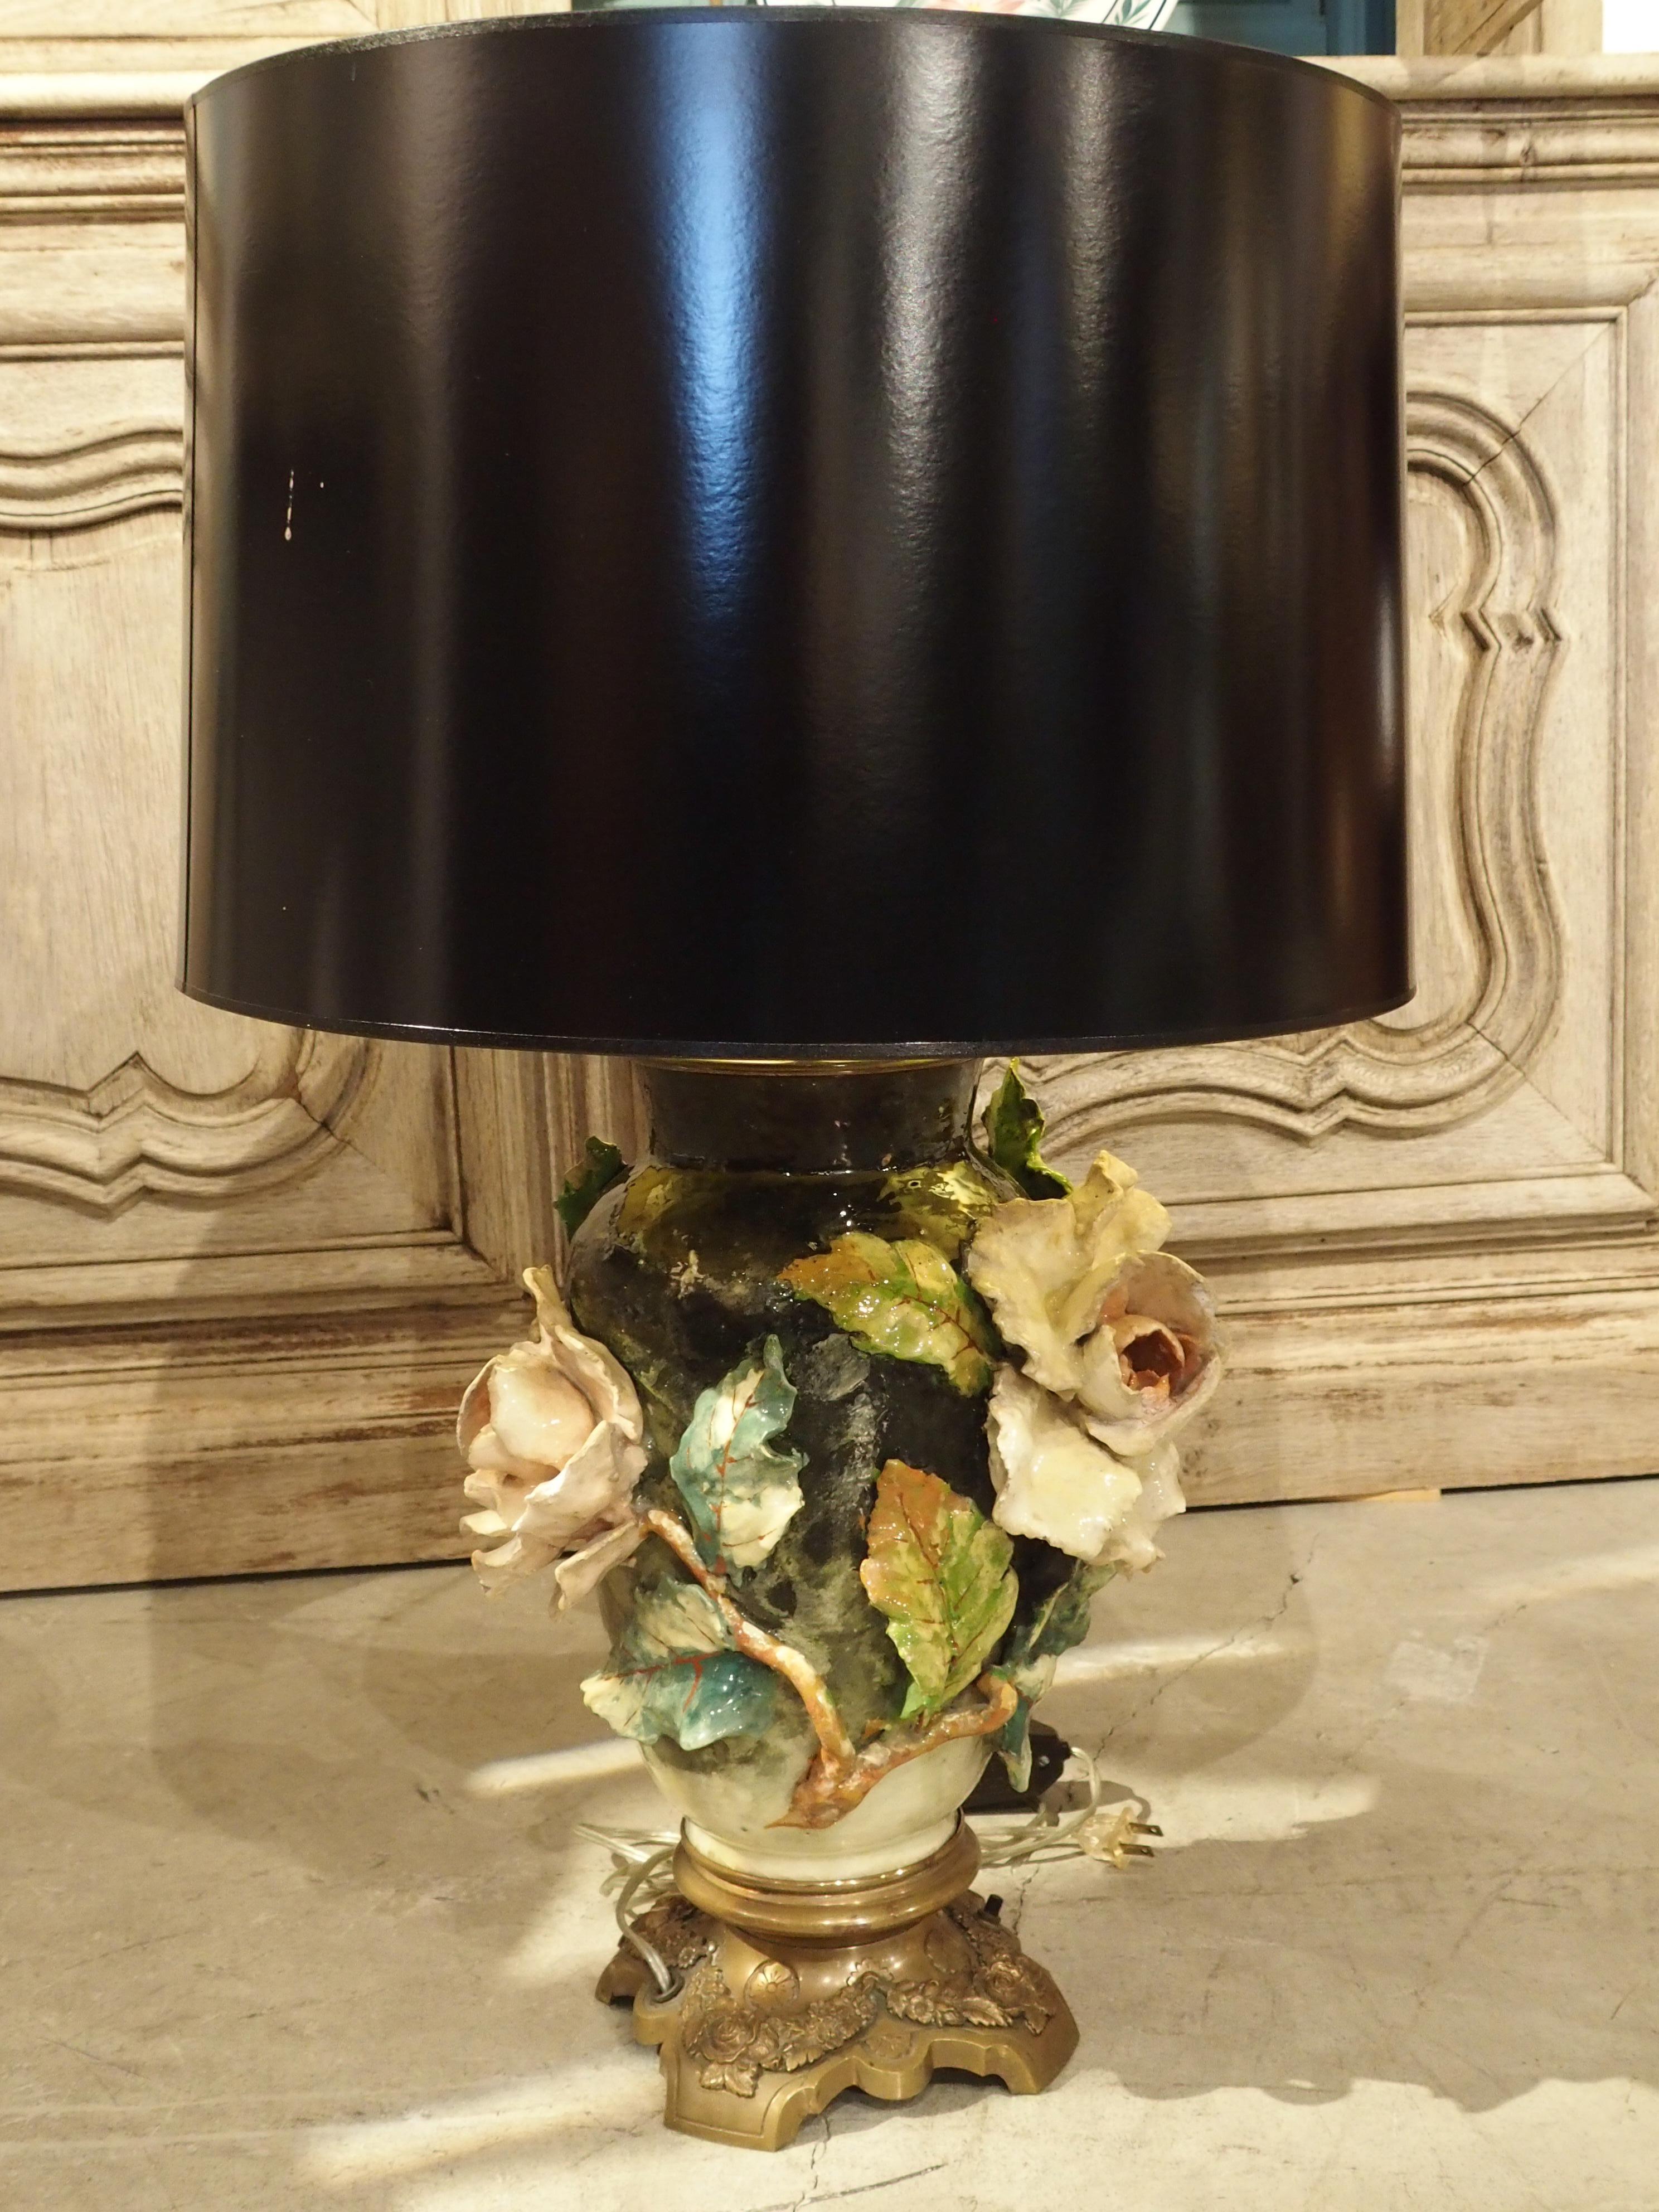 This stunning antique French lamp has been made with a barbotine vase with gross relief flowers. It is mounted to an ormolu base, and a contemporary black shade has been added. The vibrant colors of the vase include pinks, creams, greens, blacks,